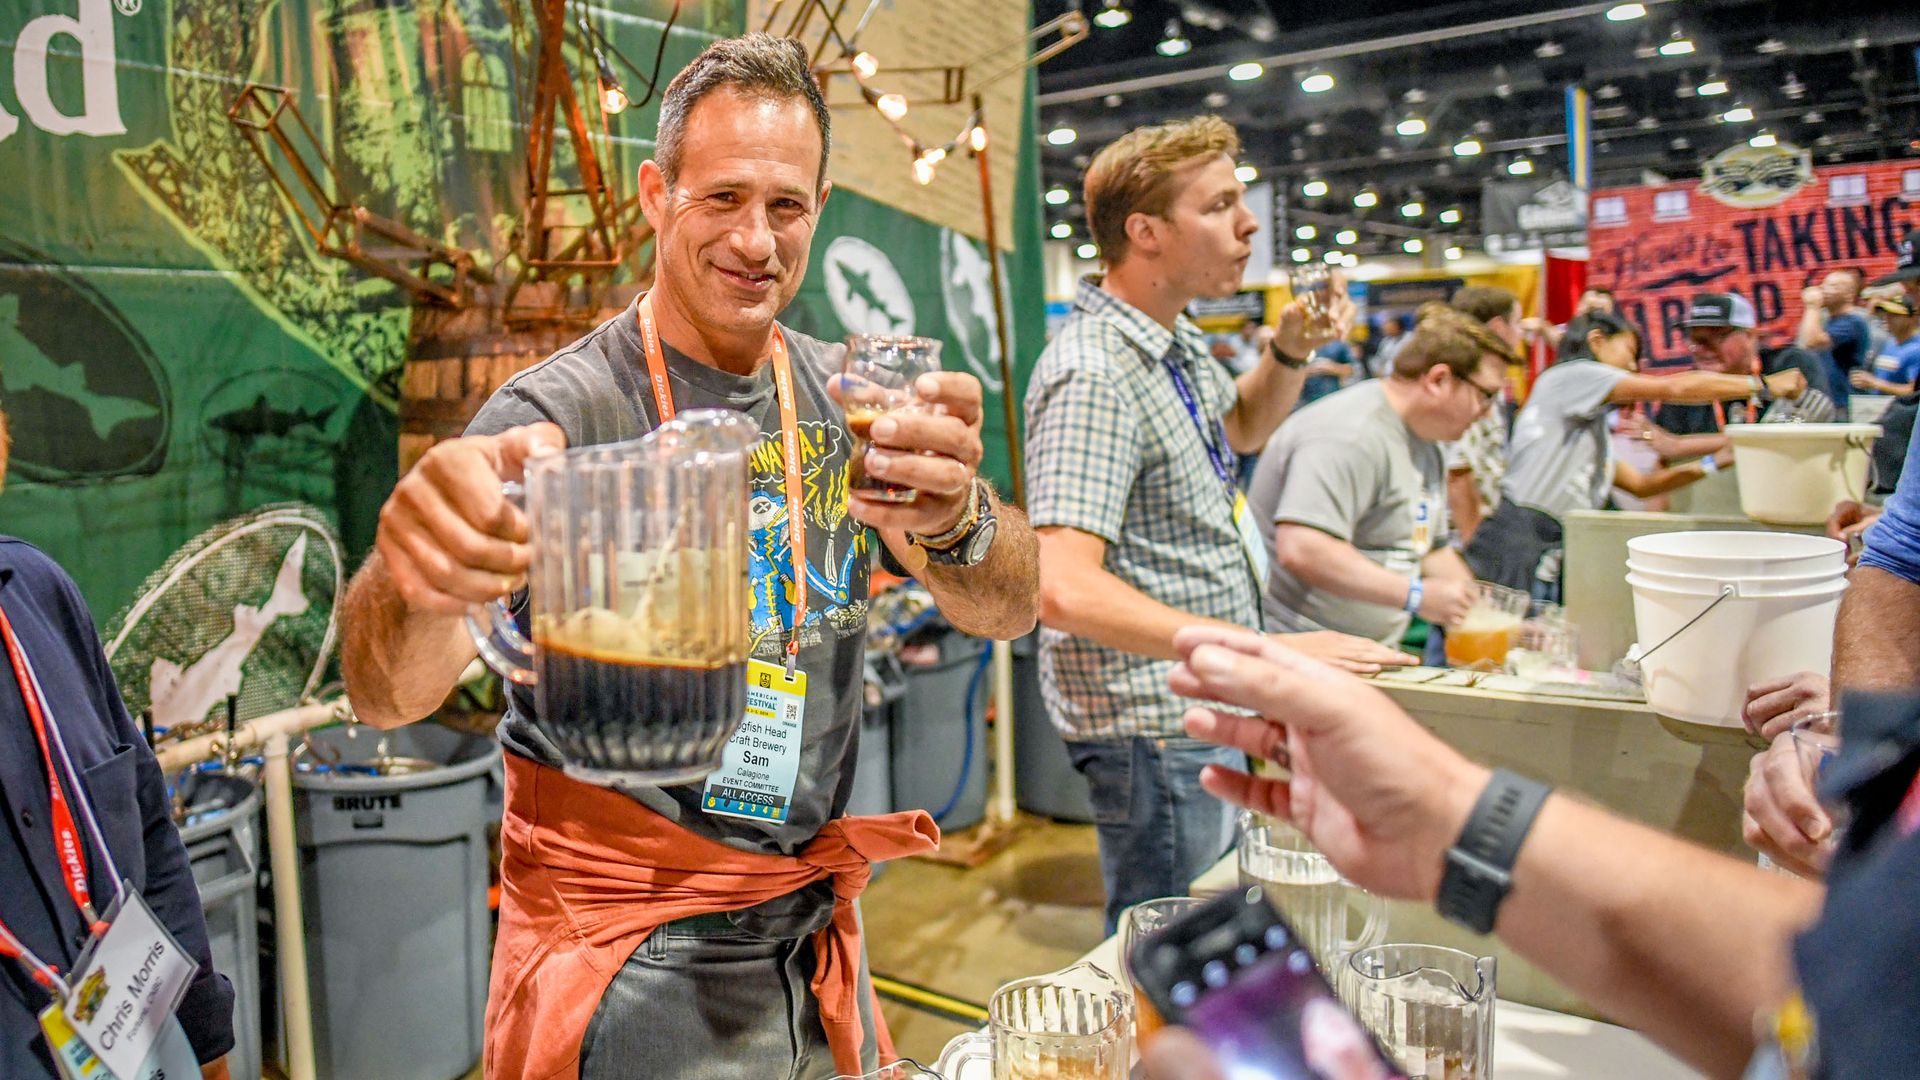 Dogfish Head's Sam Calagione pours beer at the 2019 GABF. Photo courtesy of Brewers Association